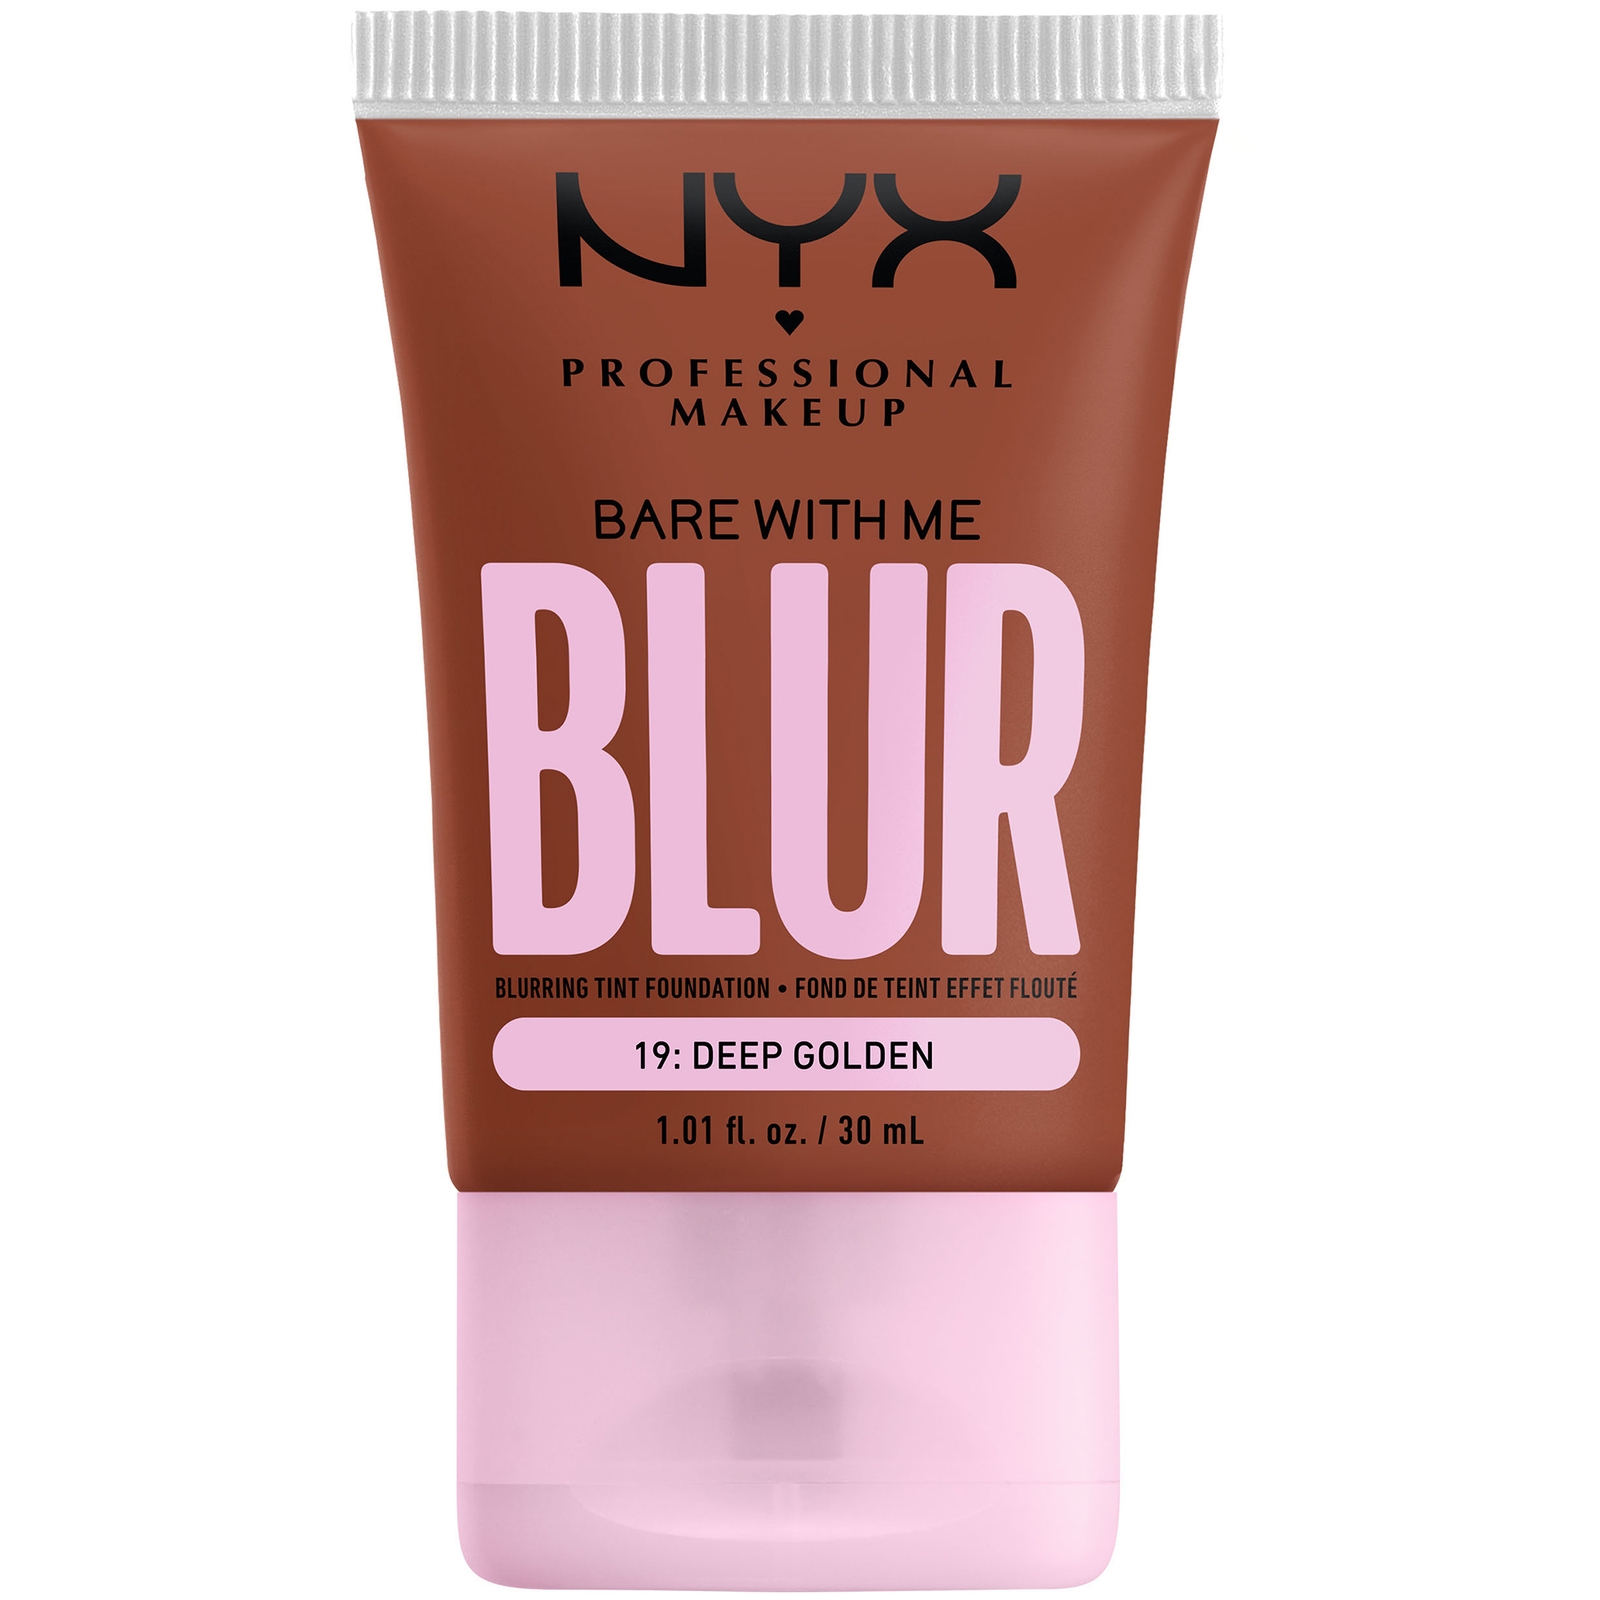 Nyx Professional Makeup Bare With Me Blur Tint Foundation 30ml (varios Shades) - Deep Golden In White